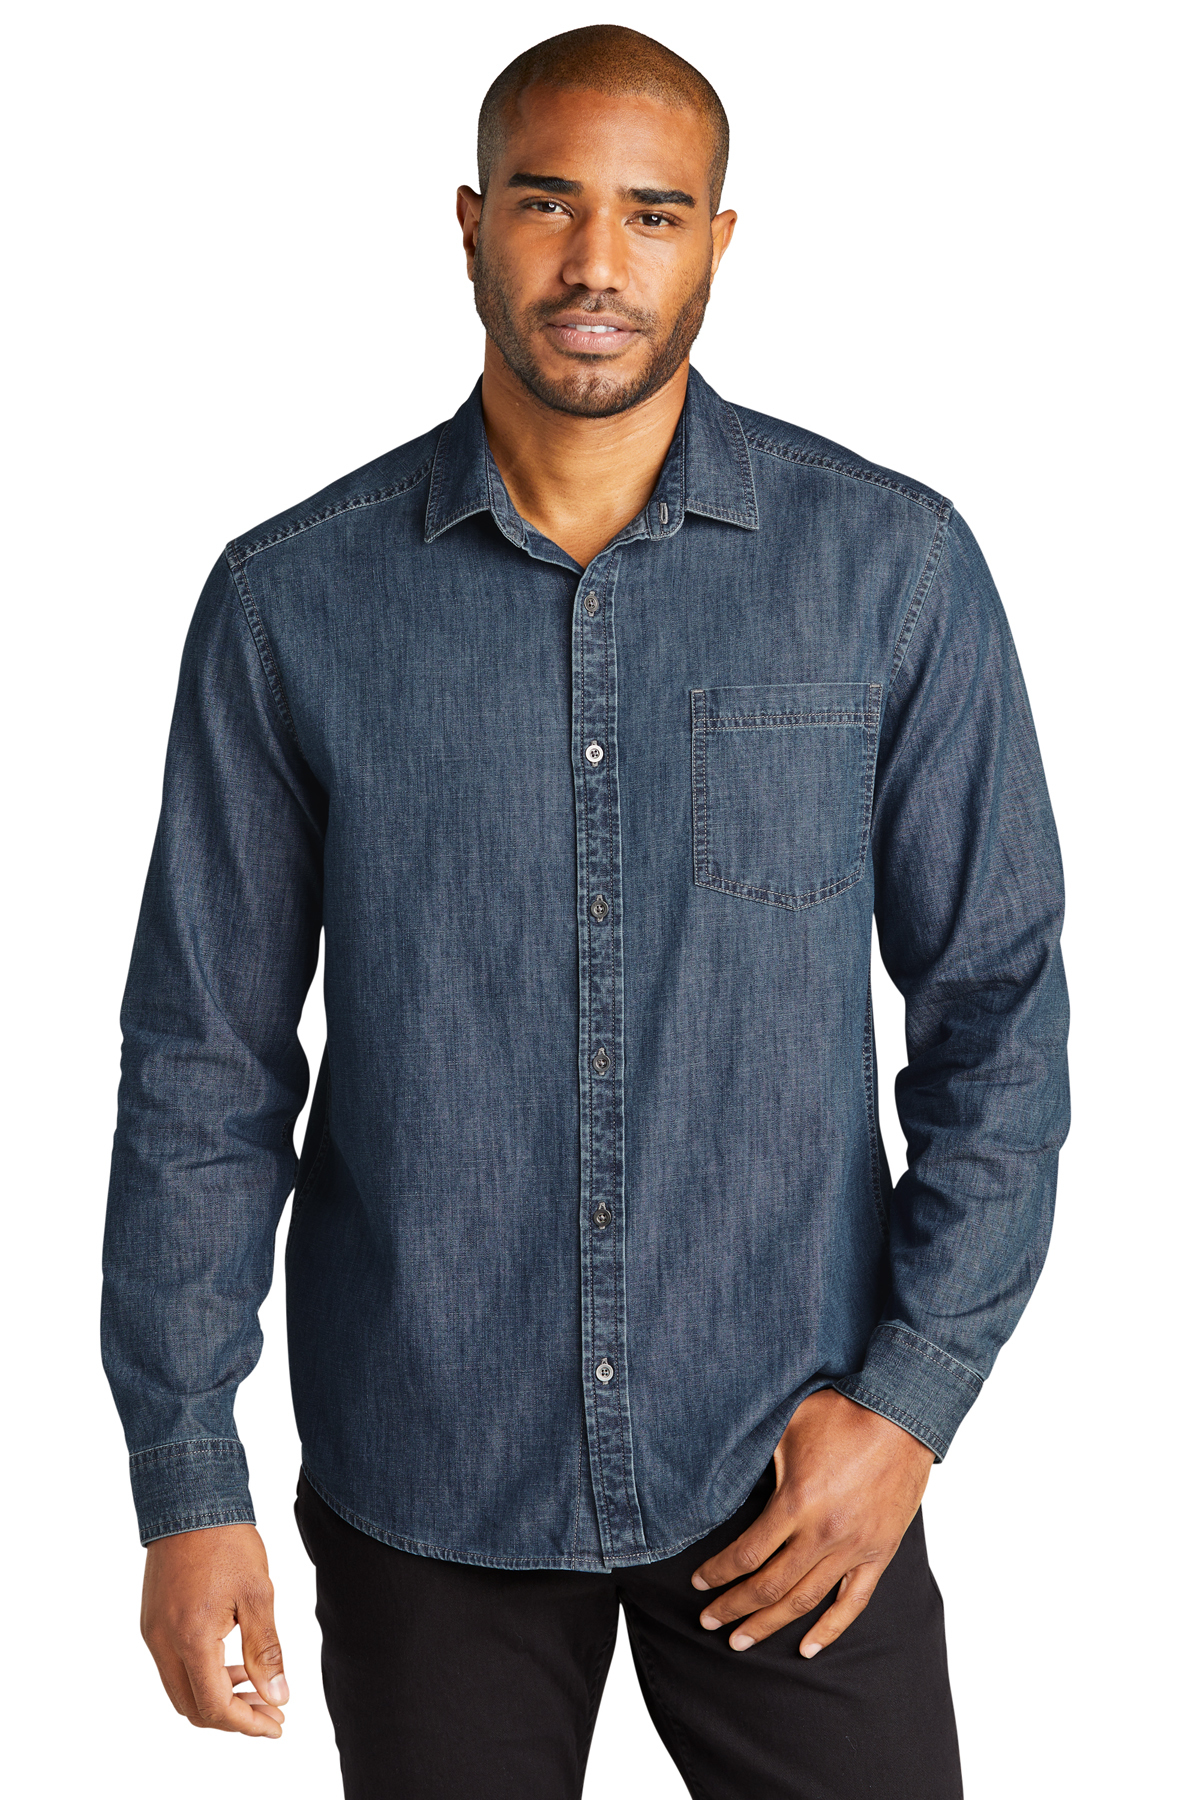 How To Style A Denim Shirt - Men's Outfit Ideas For Jean Shirts